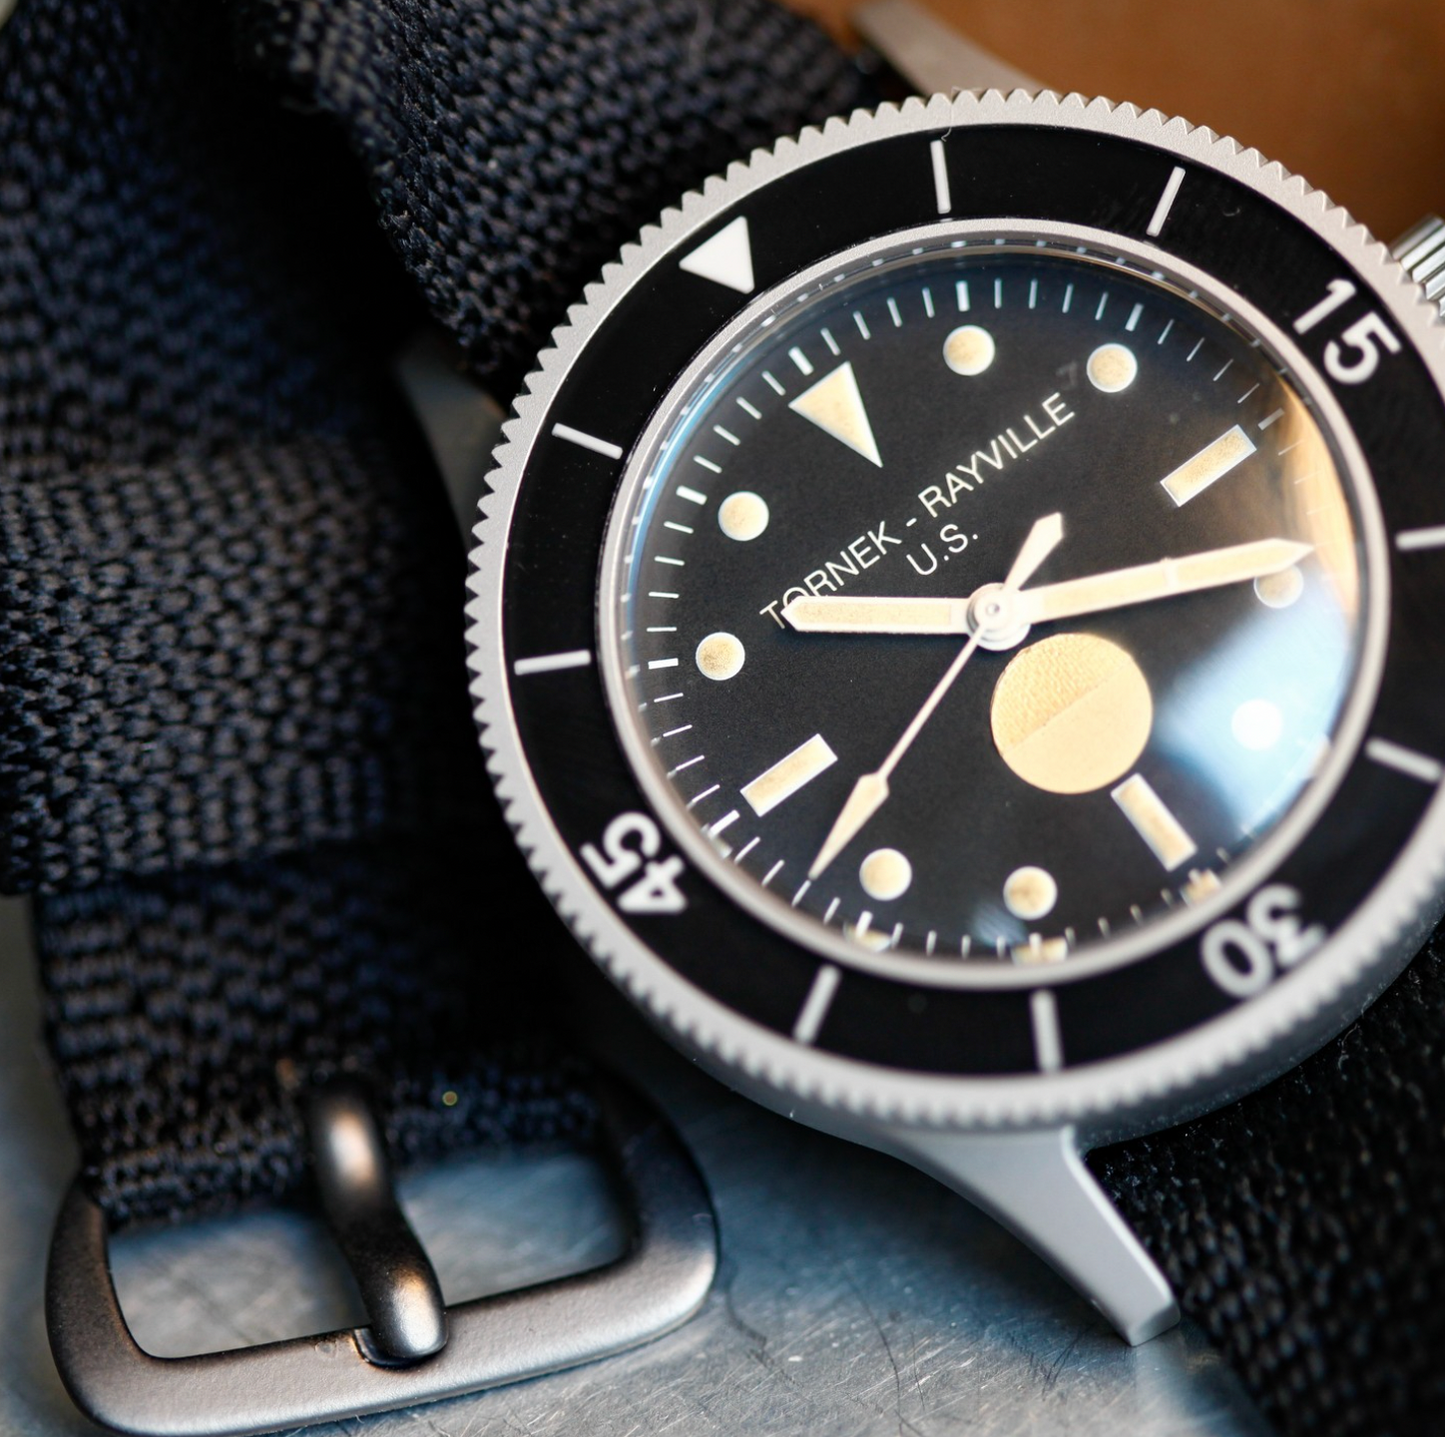 TR-900 STRAP, THE MILSPEC STRAP FOR 1960’S DIVE WATCHES